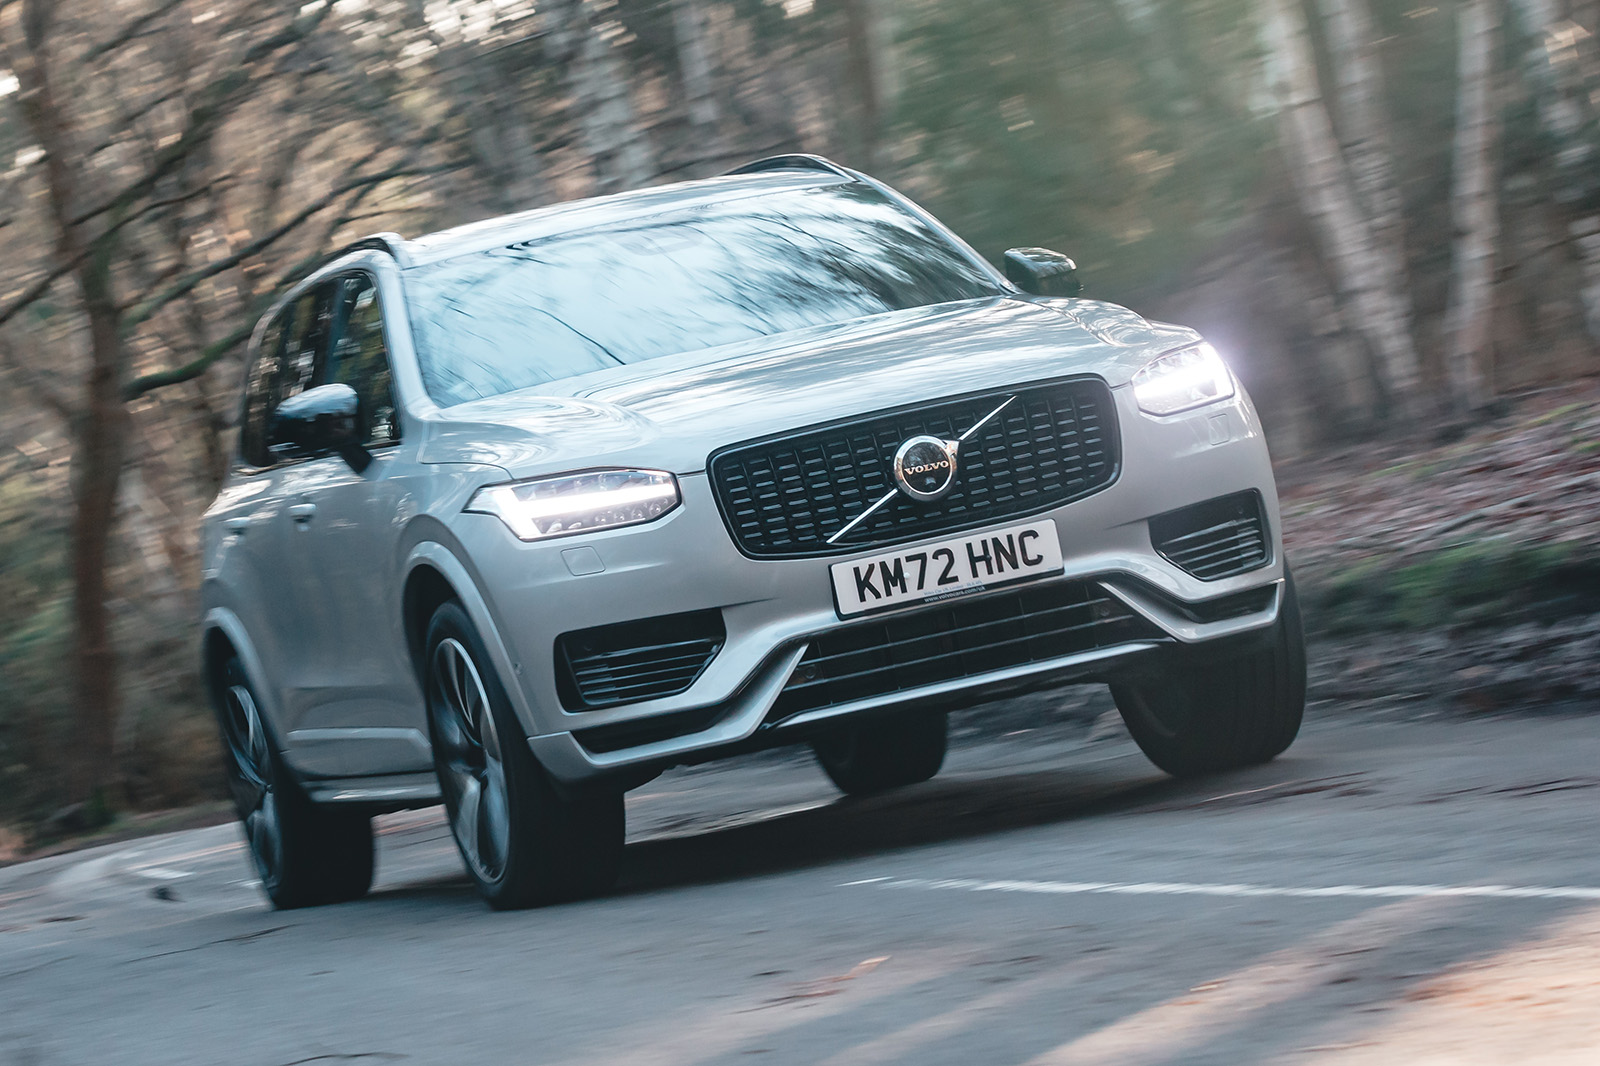 https://www.autocar.co.uk/sites/autocar.co.uk/files/images/car-reviews/first-drives/legacy/1-volvo-xc90-2023-top-10.jpg